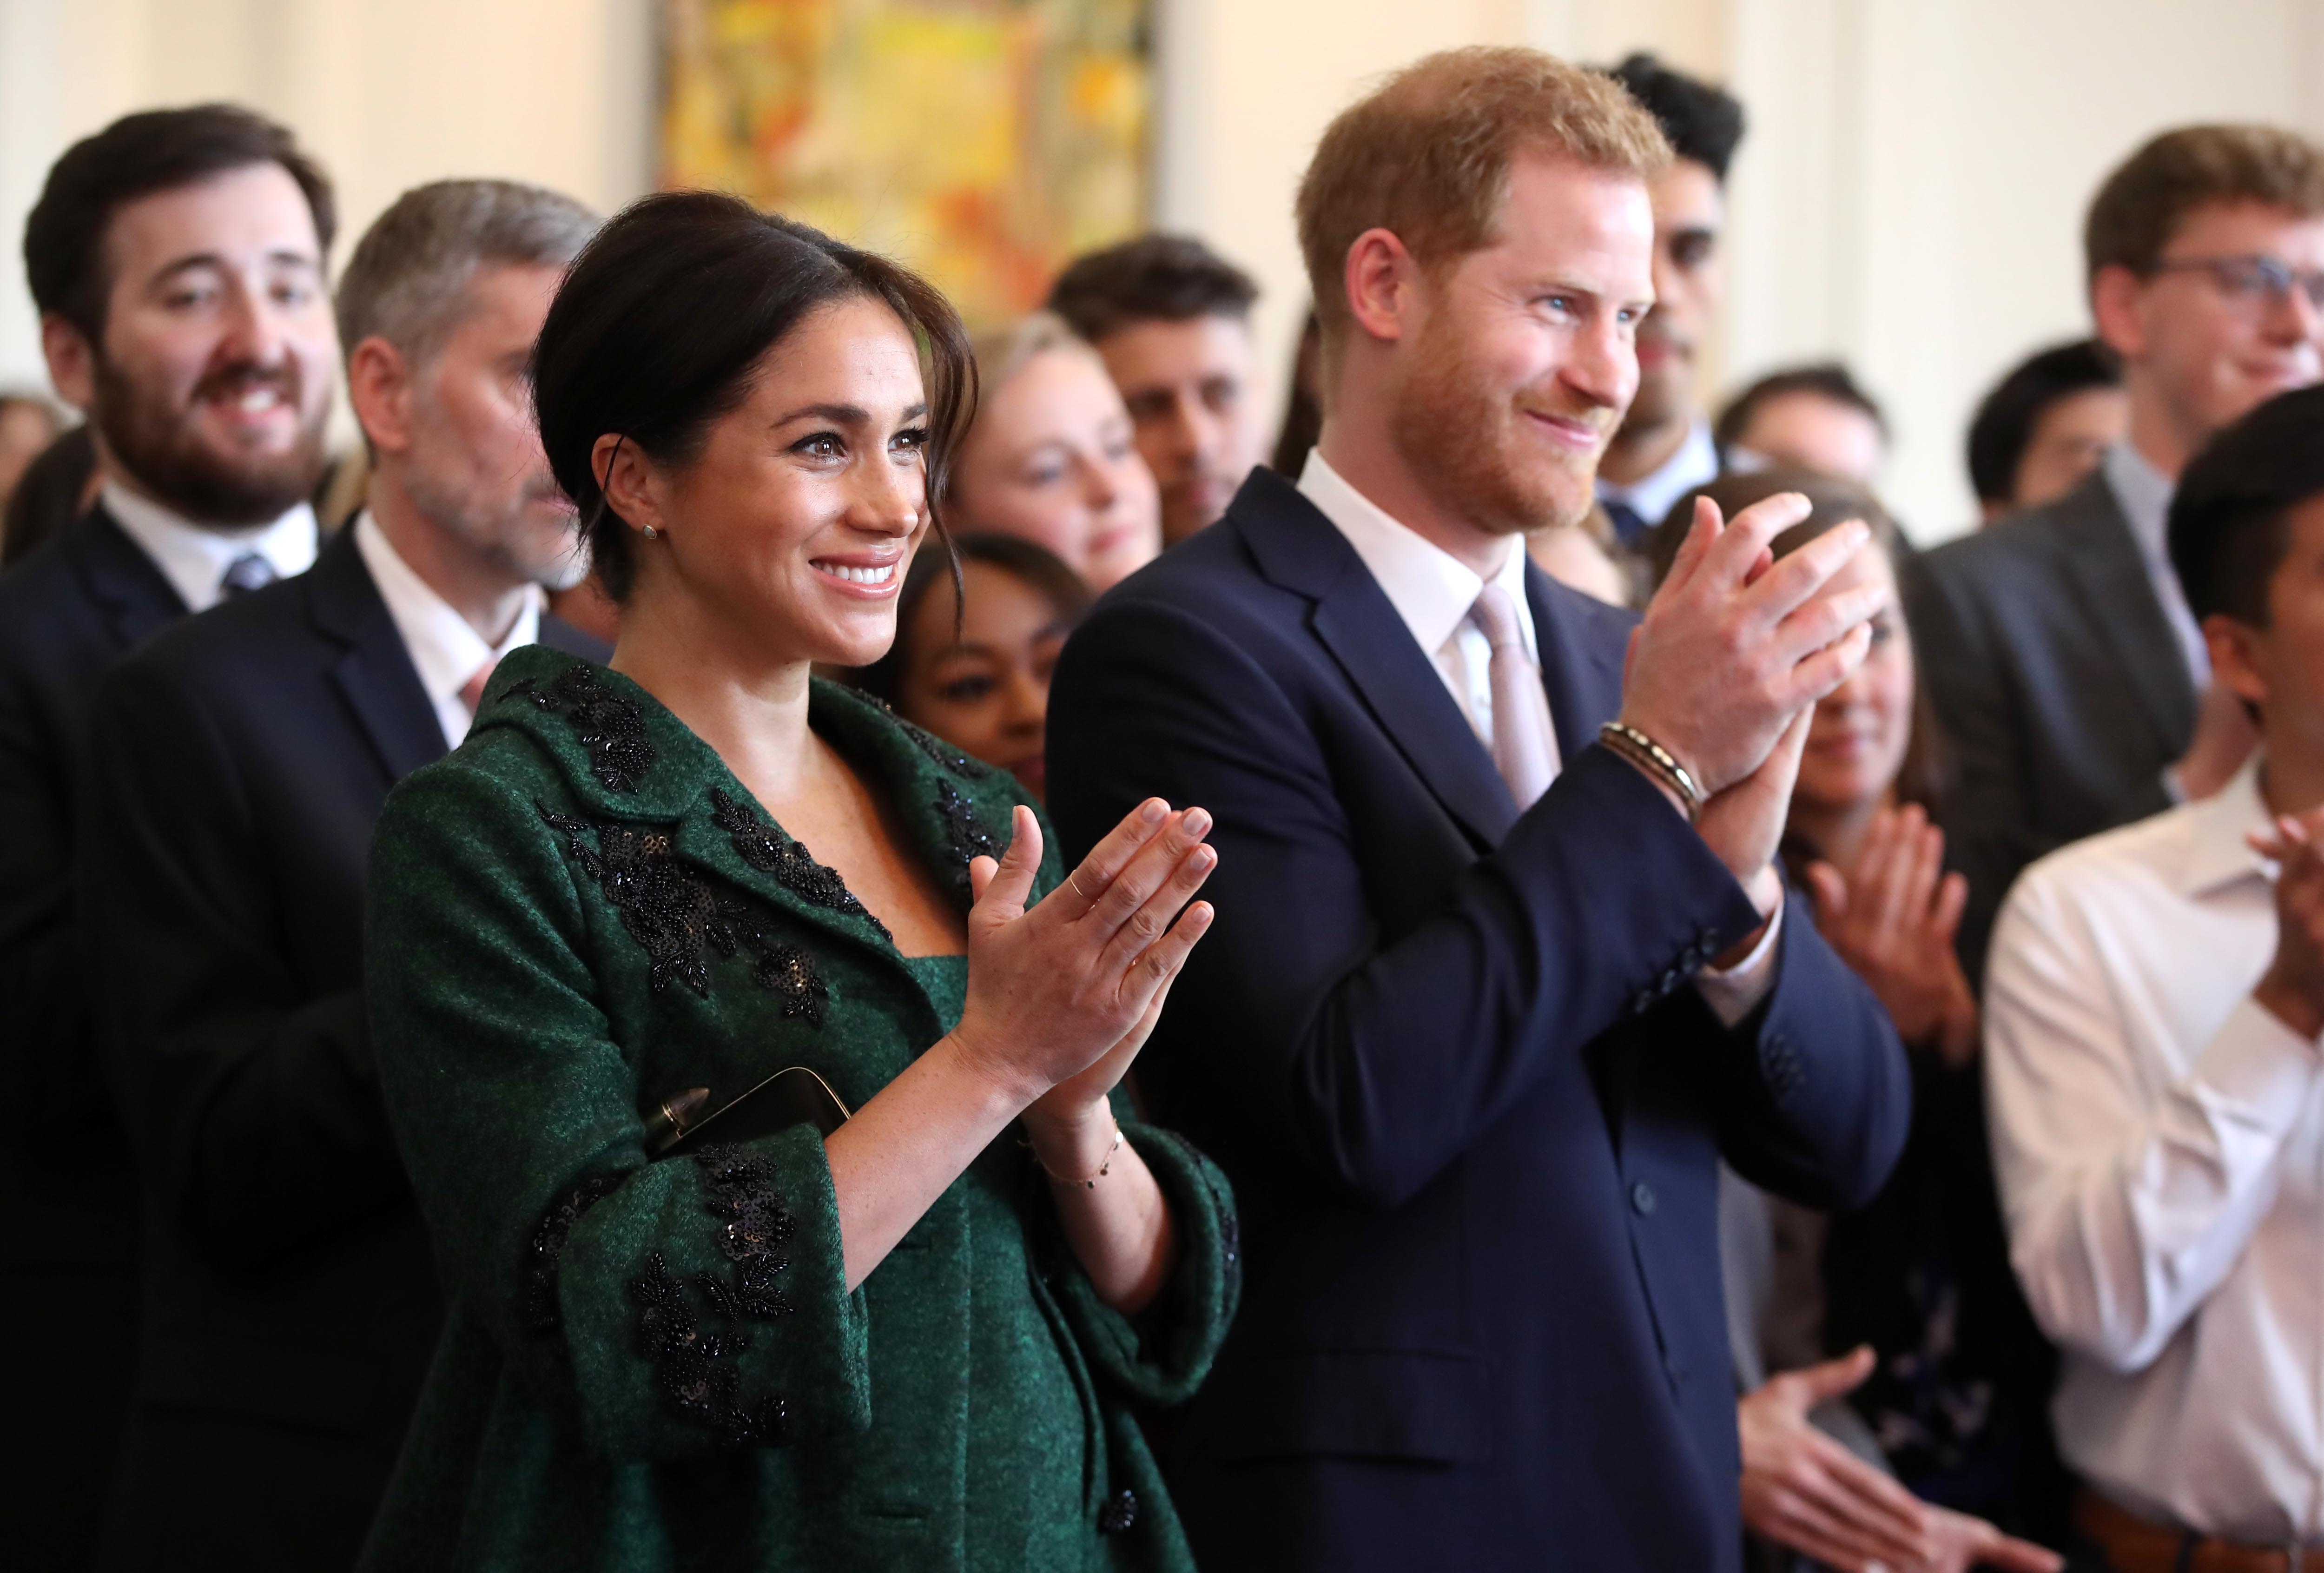 HEAR YE: Meghan Markle Is Officially In Labour With The Royal Babe, Says Palace